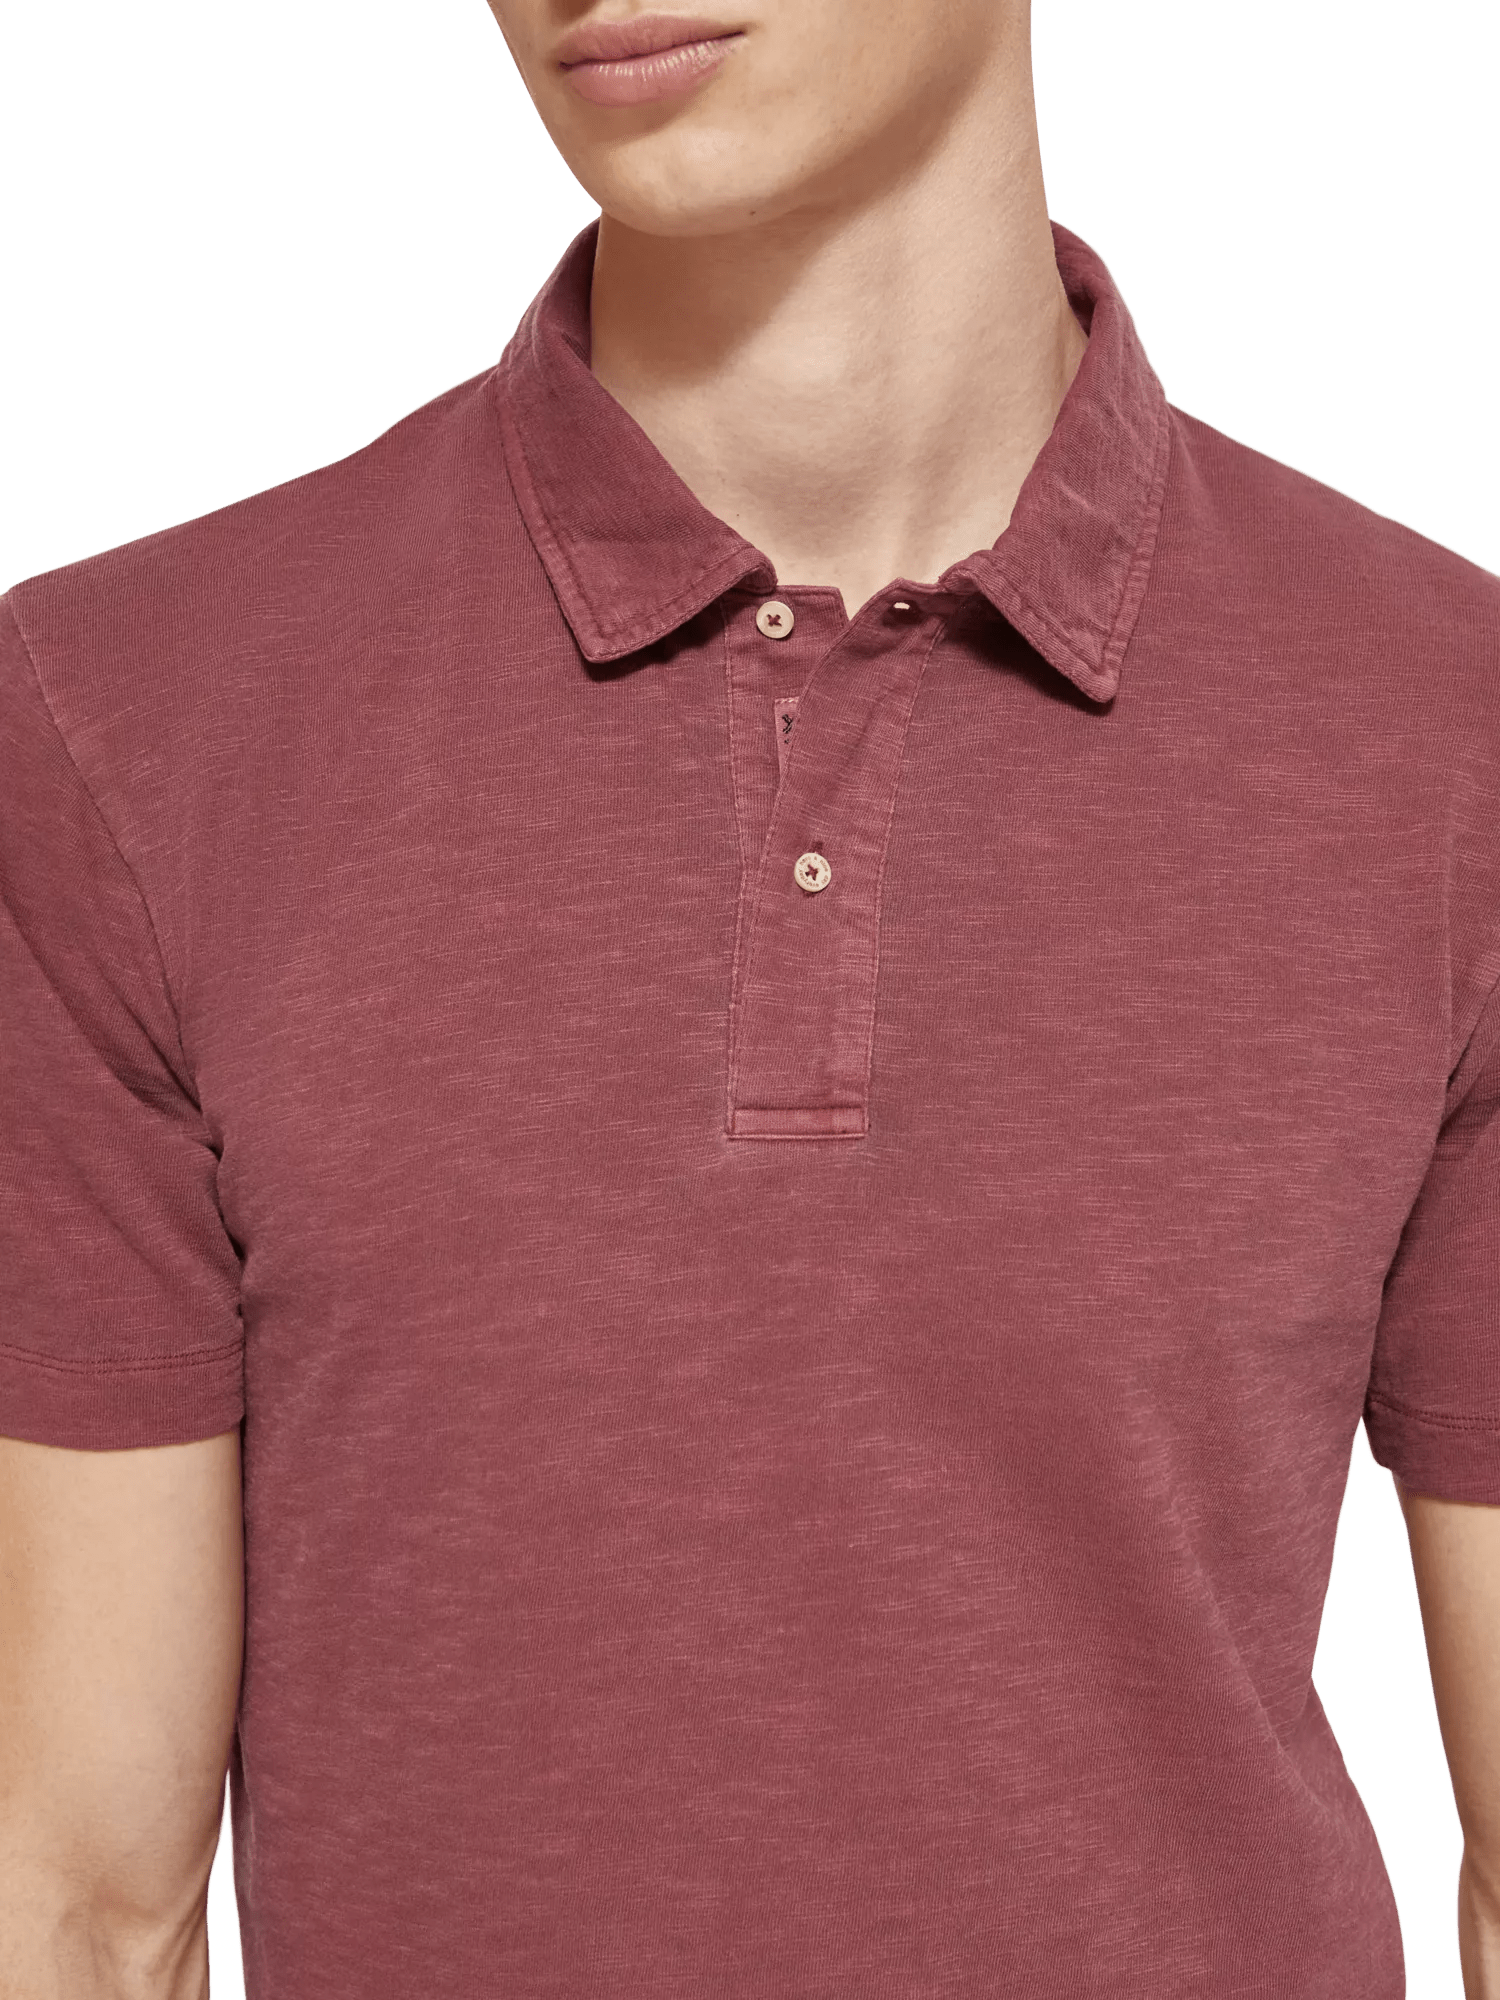 Scotch & Soda Garment-dyed jersey polo in Organic Cotton 174564_6722_MDL_DTL1